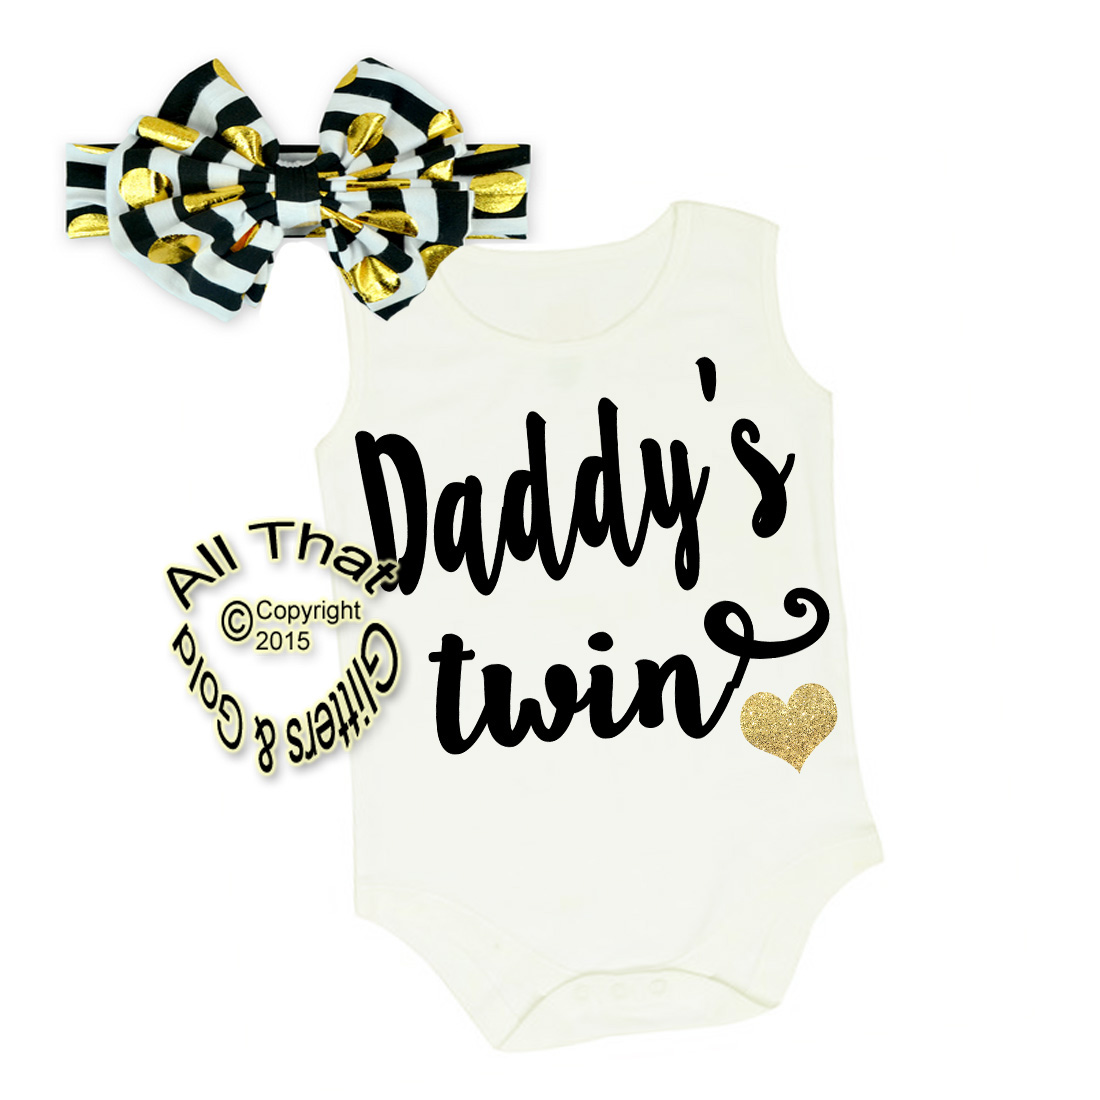 Black, White and Gold Glitter Daddy's Twin Shirt or Outfit